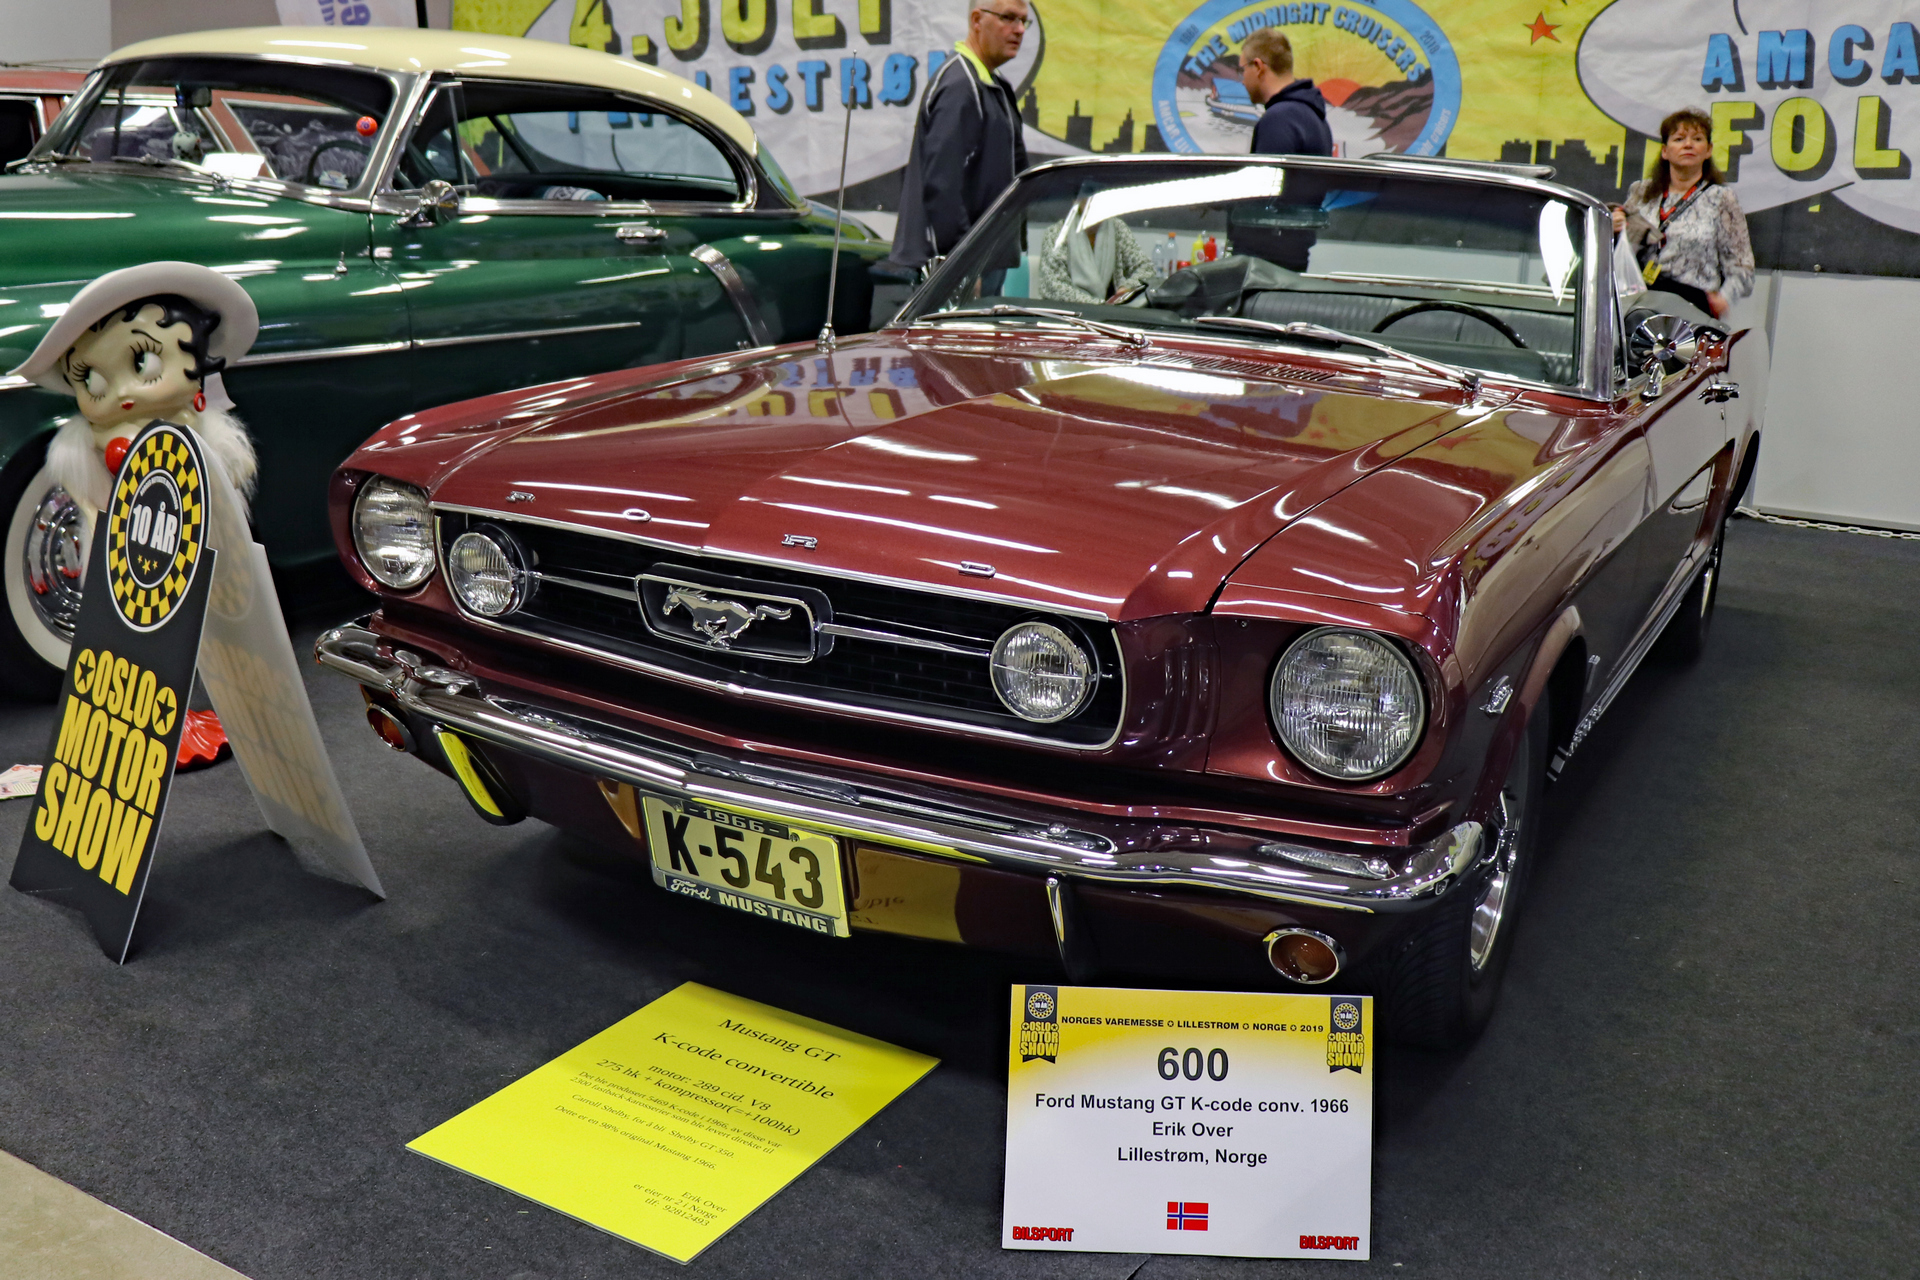 221-1966 Ford Mustang GT K-code convertible 01. Ei